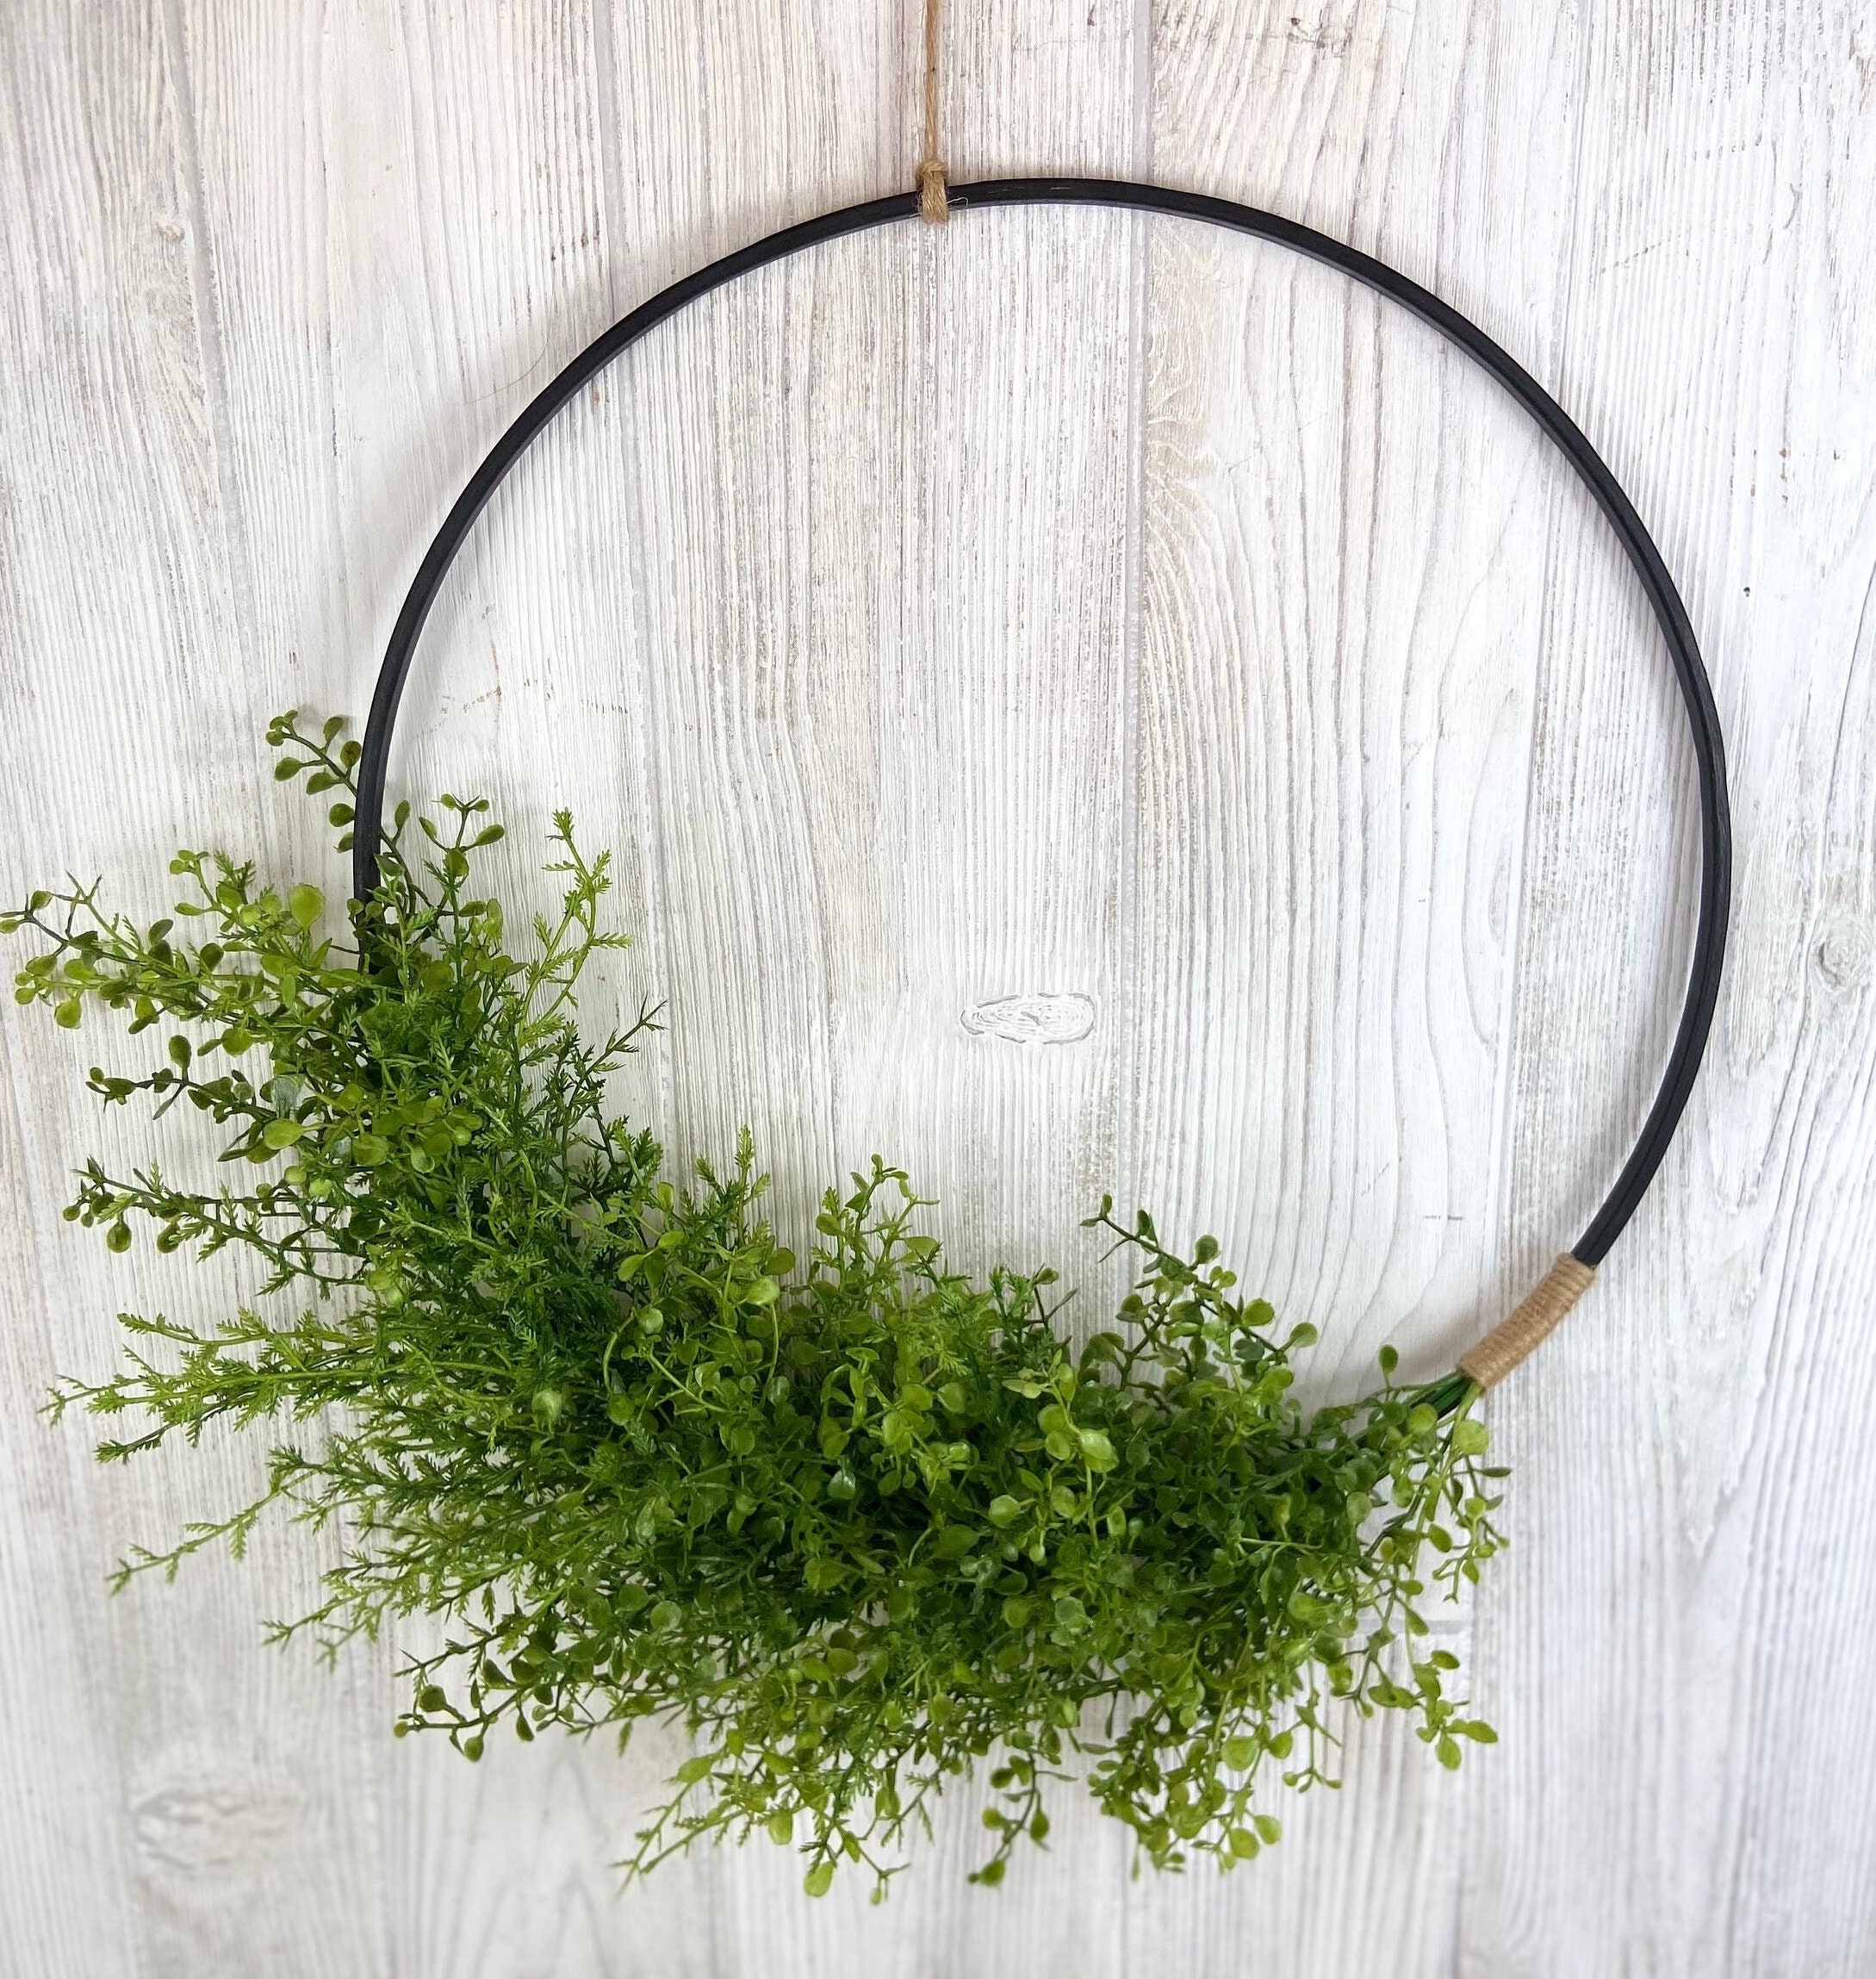 10 Fern Frond Fake Greenery Candle Ring Jar Mini Wreath 4 Center Floral  Arranging Supply Artificial Plastic Greenery 